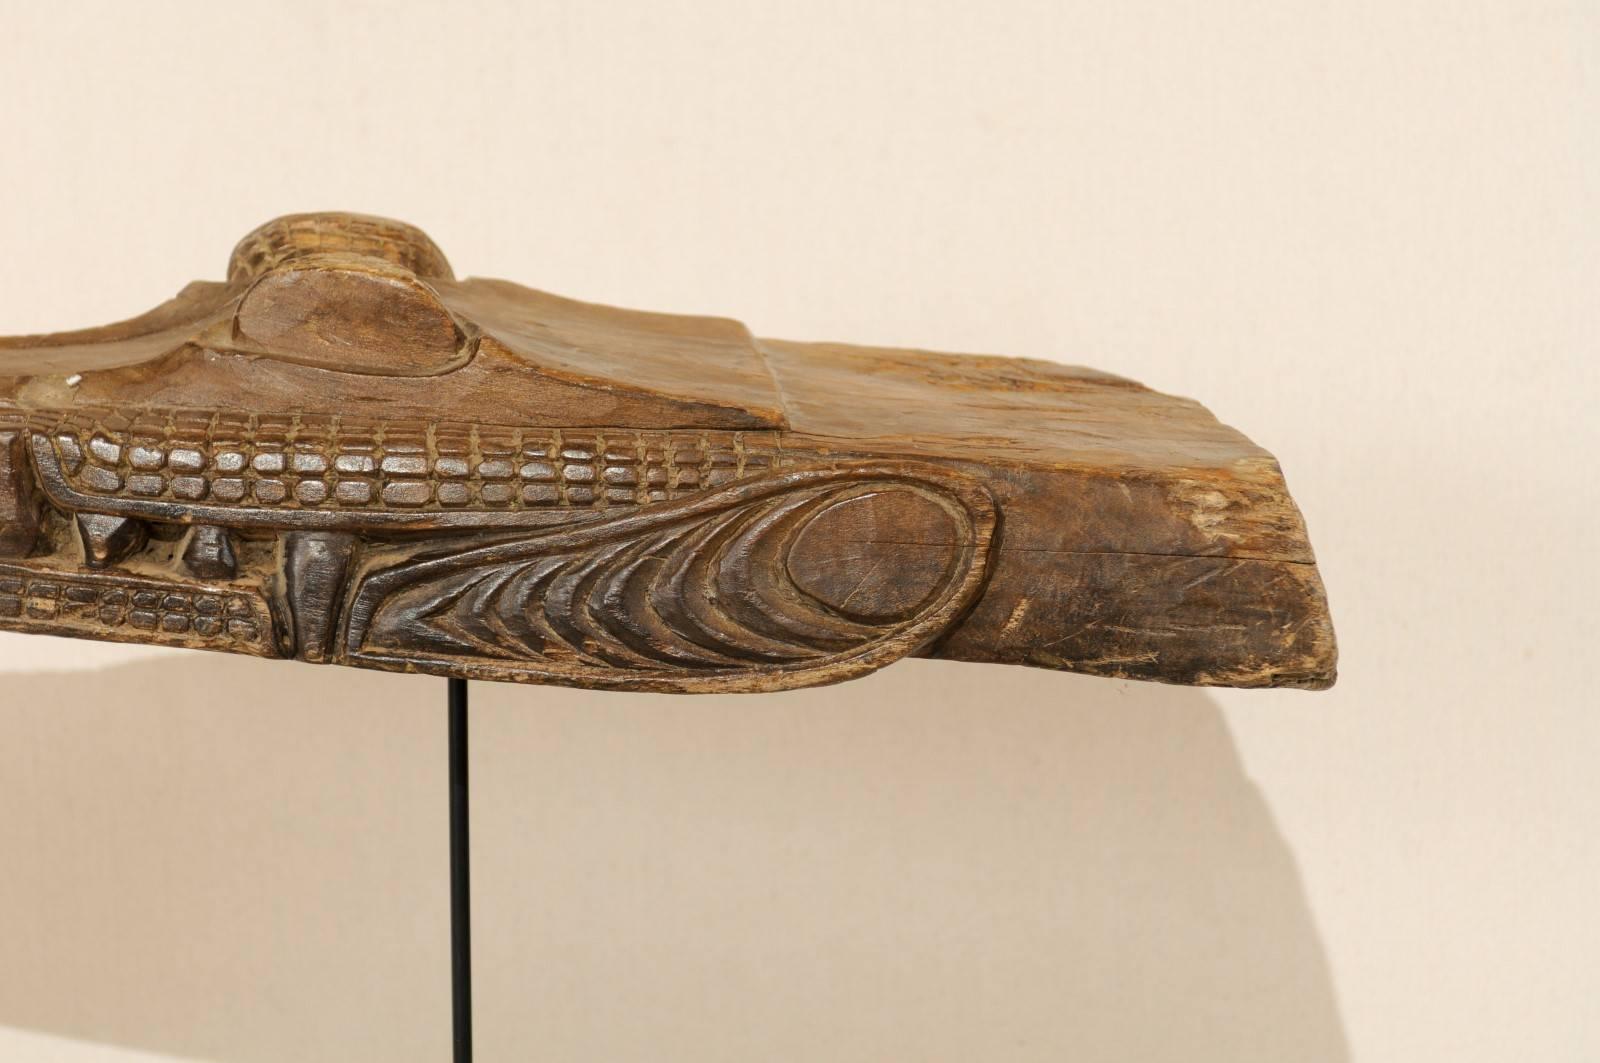 Papua New Guinean Hand Carved Crocodile Wood Boat Prow from a Papua New Guinea Village Canoe